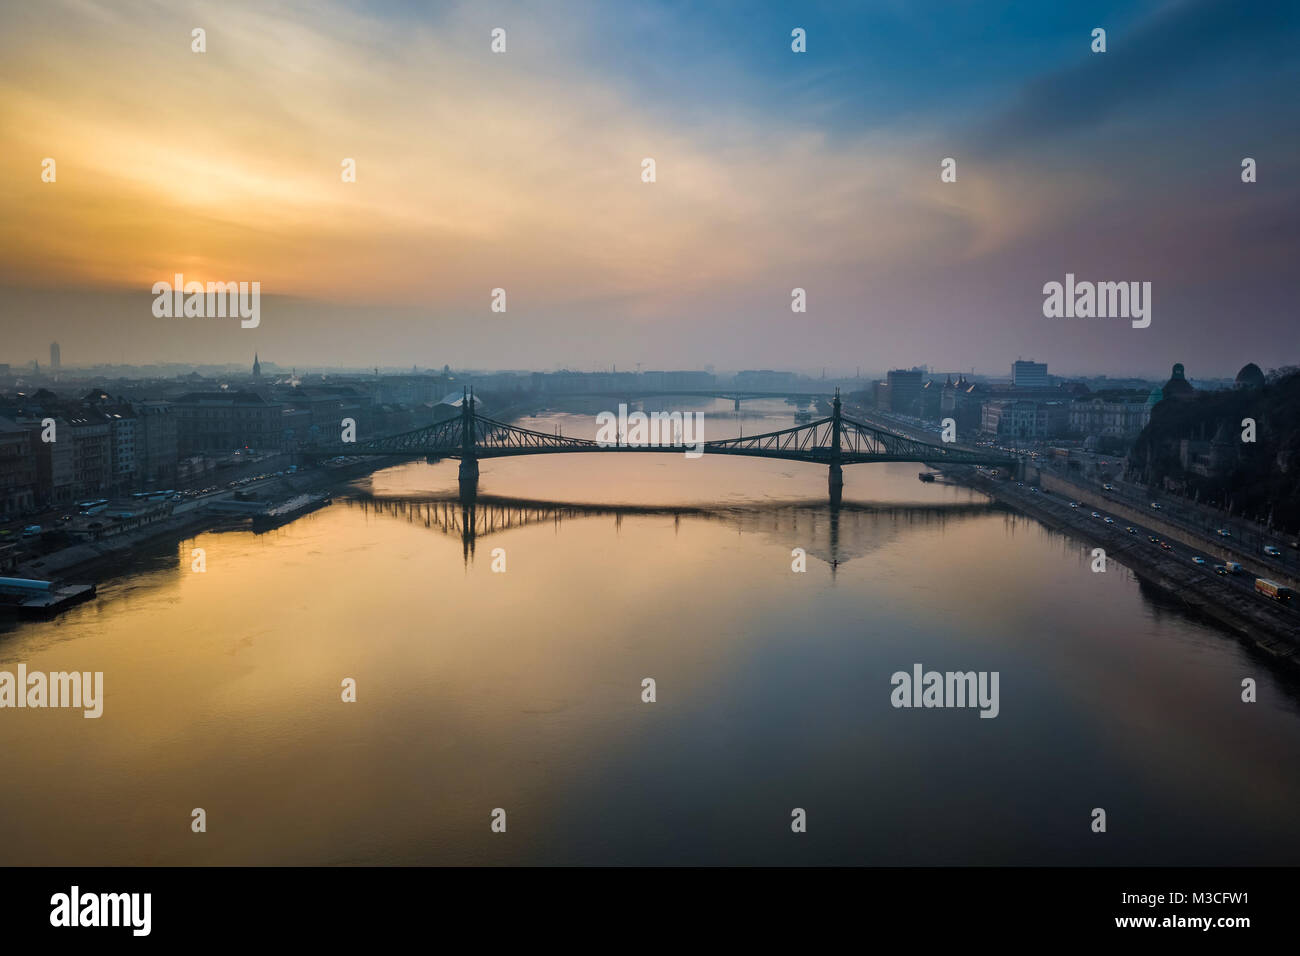 Budapest, Hungary - Aerial panoramic skyline view of Liberty Bridge over River Danube at sunrise with beautiful sky and clouds Stock Photo